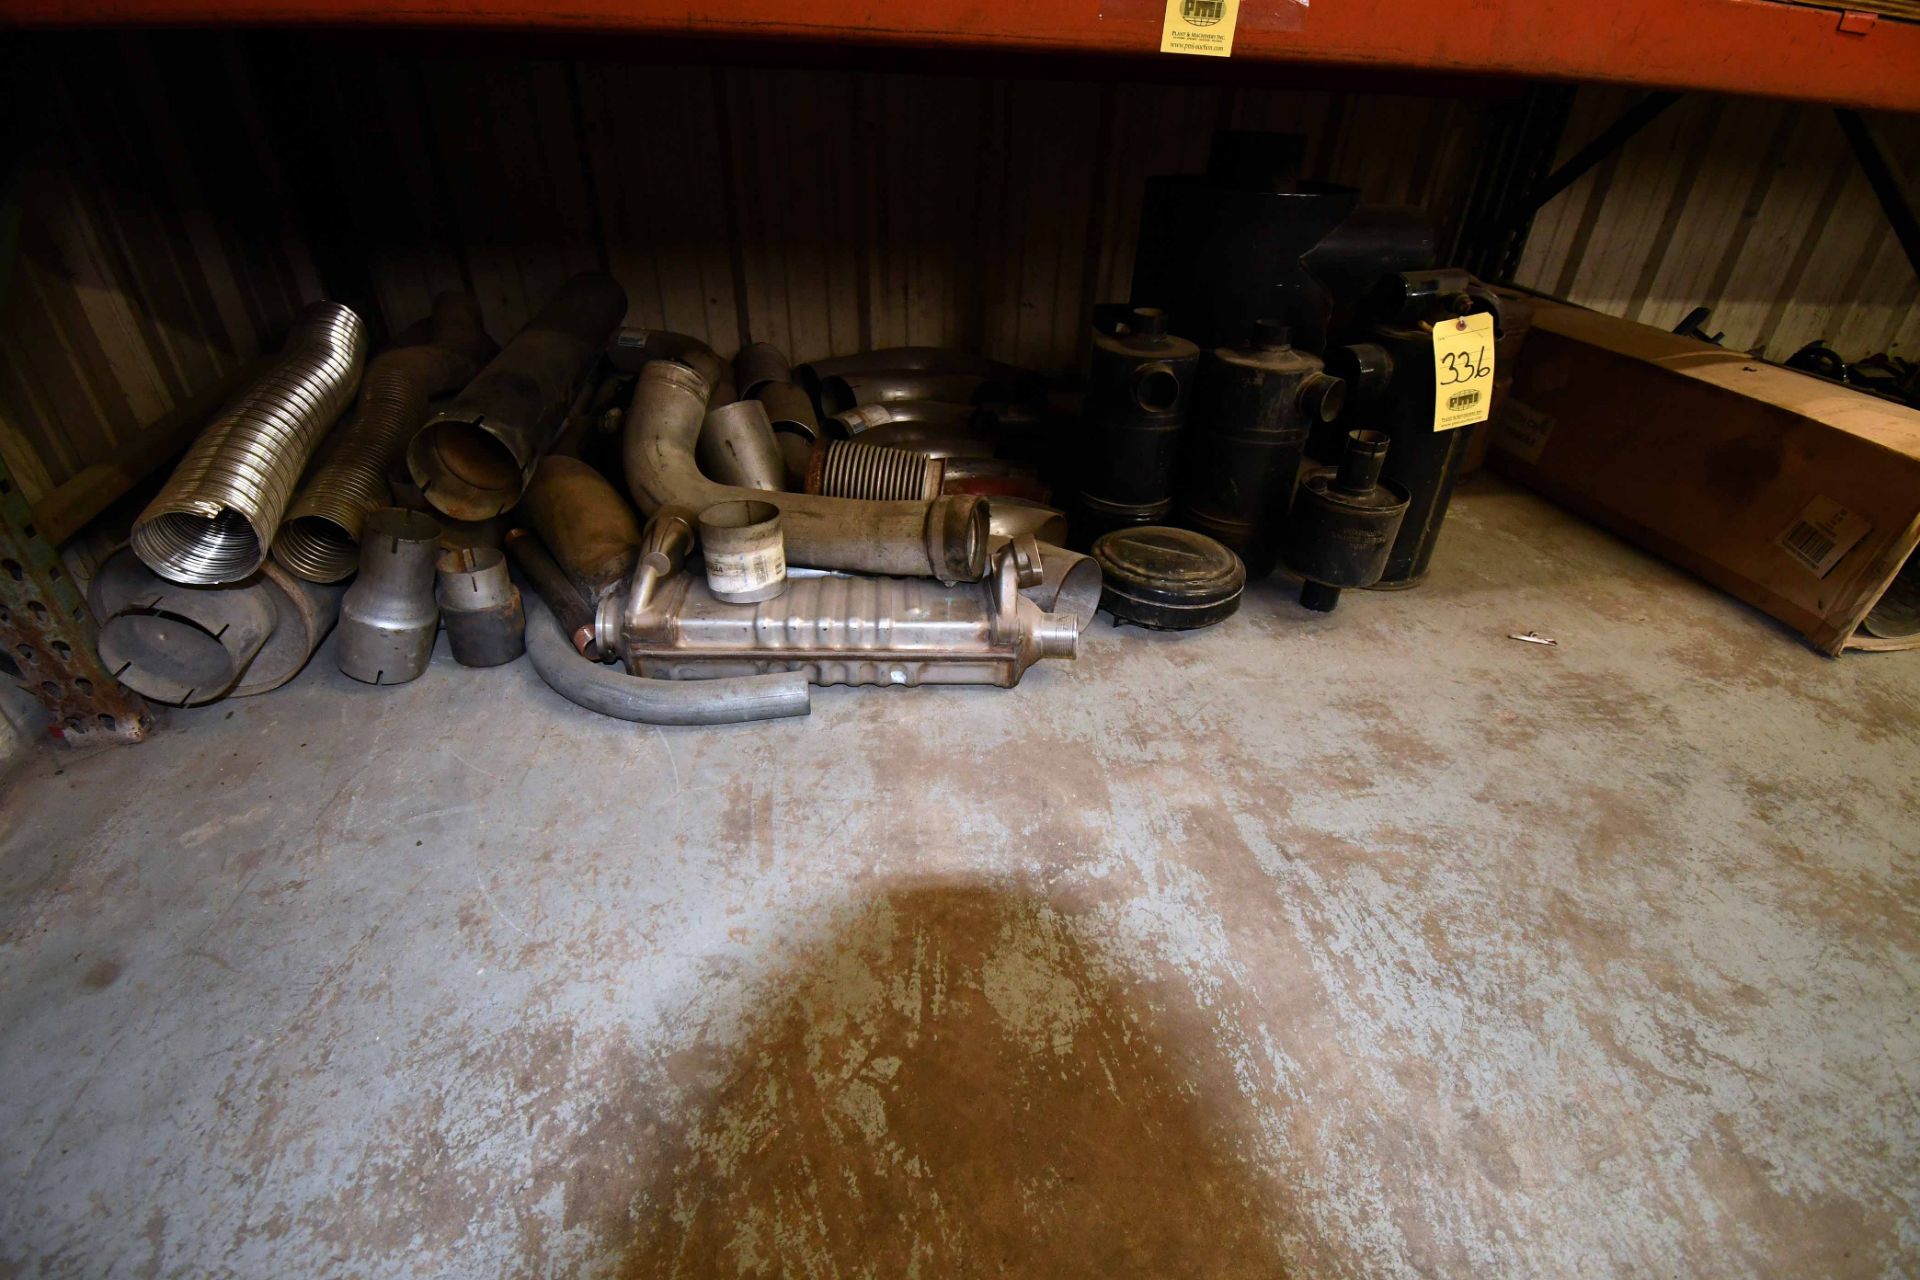 LOT OF TRUCK EXHAUST PARTS (Location: MDS Boring & Drilling, 11900 Hirsch Road, Houston, TX 77050)